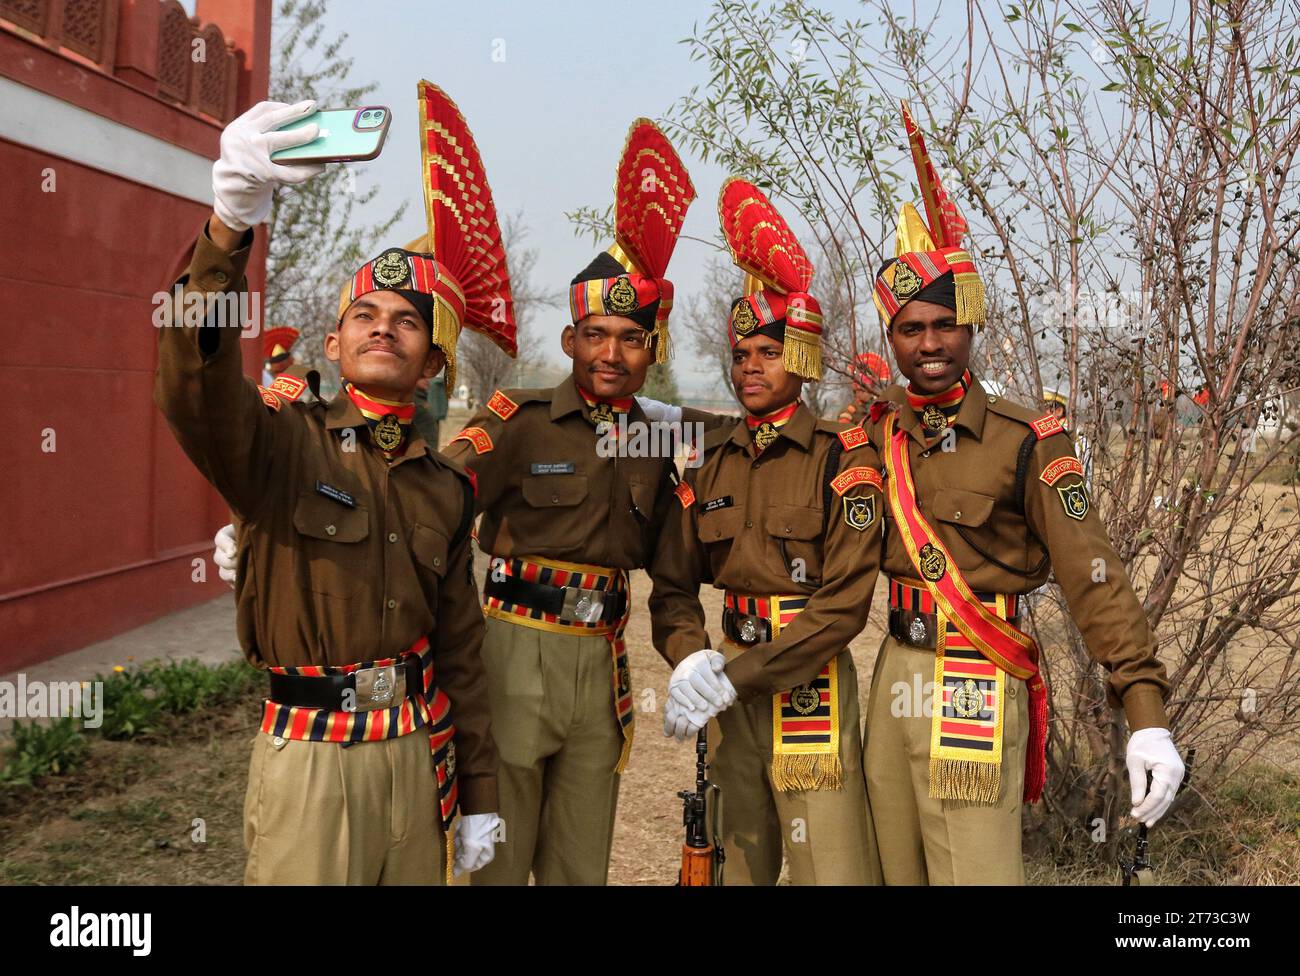 November 09, 2023, Srinagar Kashmir, India : New recruits of the Indian Border Security Force (BSF) take selfie pictures after participating in the passing out parade in Humhama, on the outskirts of Srinagar. A total of 599 recruits were formally inducted into the BSF, an Indian paramilitary force, after completing 44 weeks of training in physical fitness, weapon handling, commando operations and counter insurgency, a BSF spokesman said. On November 09, 2023, Srinagar Kashmir, India. (Photo By Firdous Nazir/Eyepix Group/Sipa USA) Stock Photo